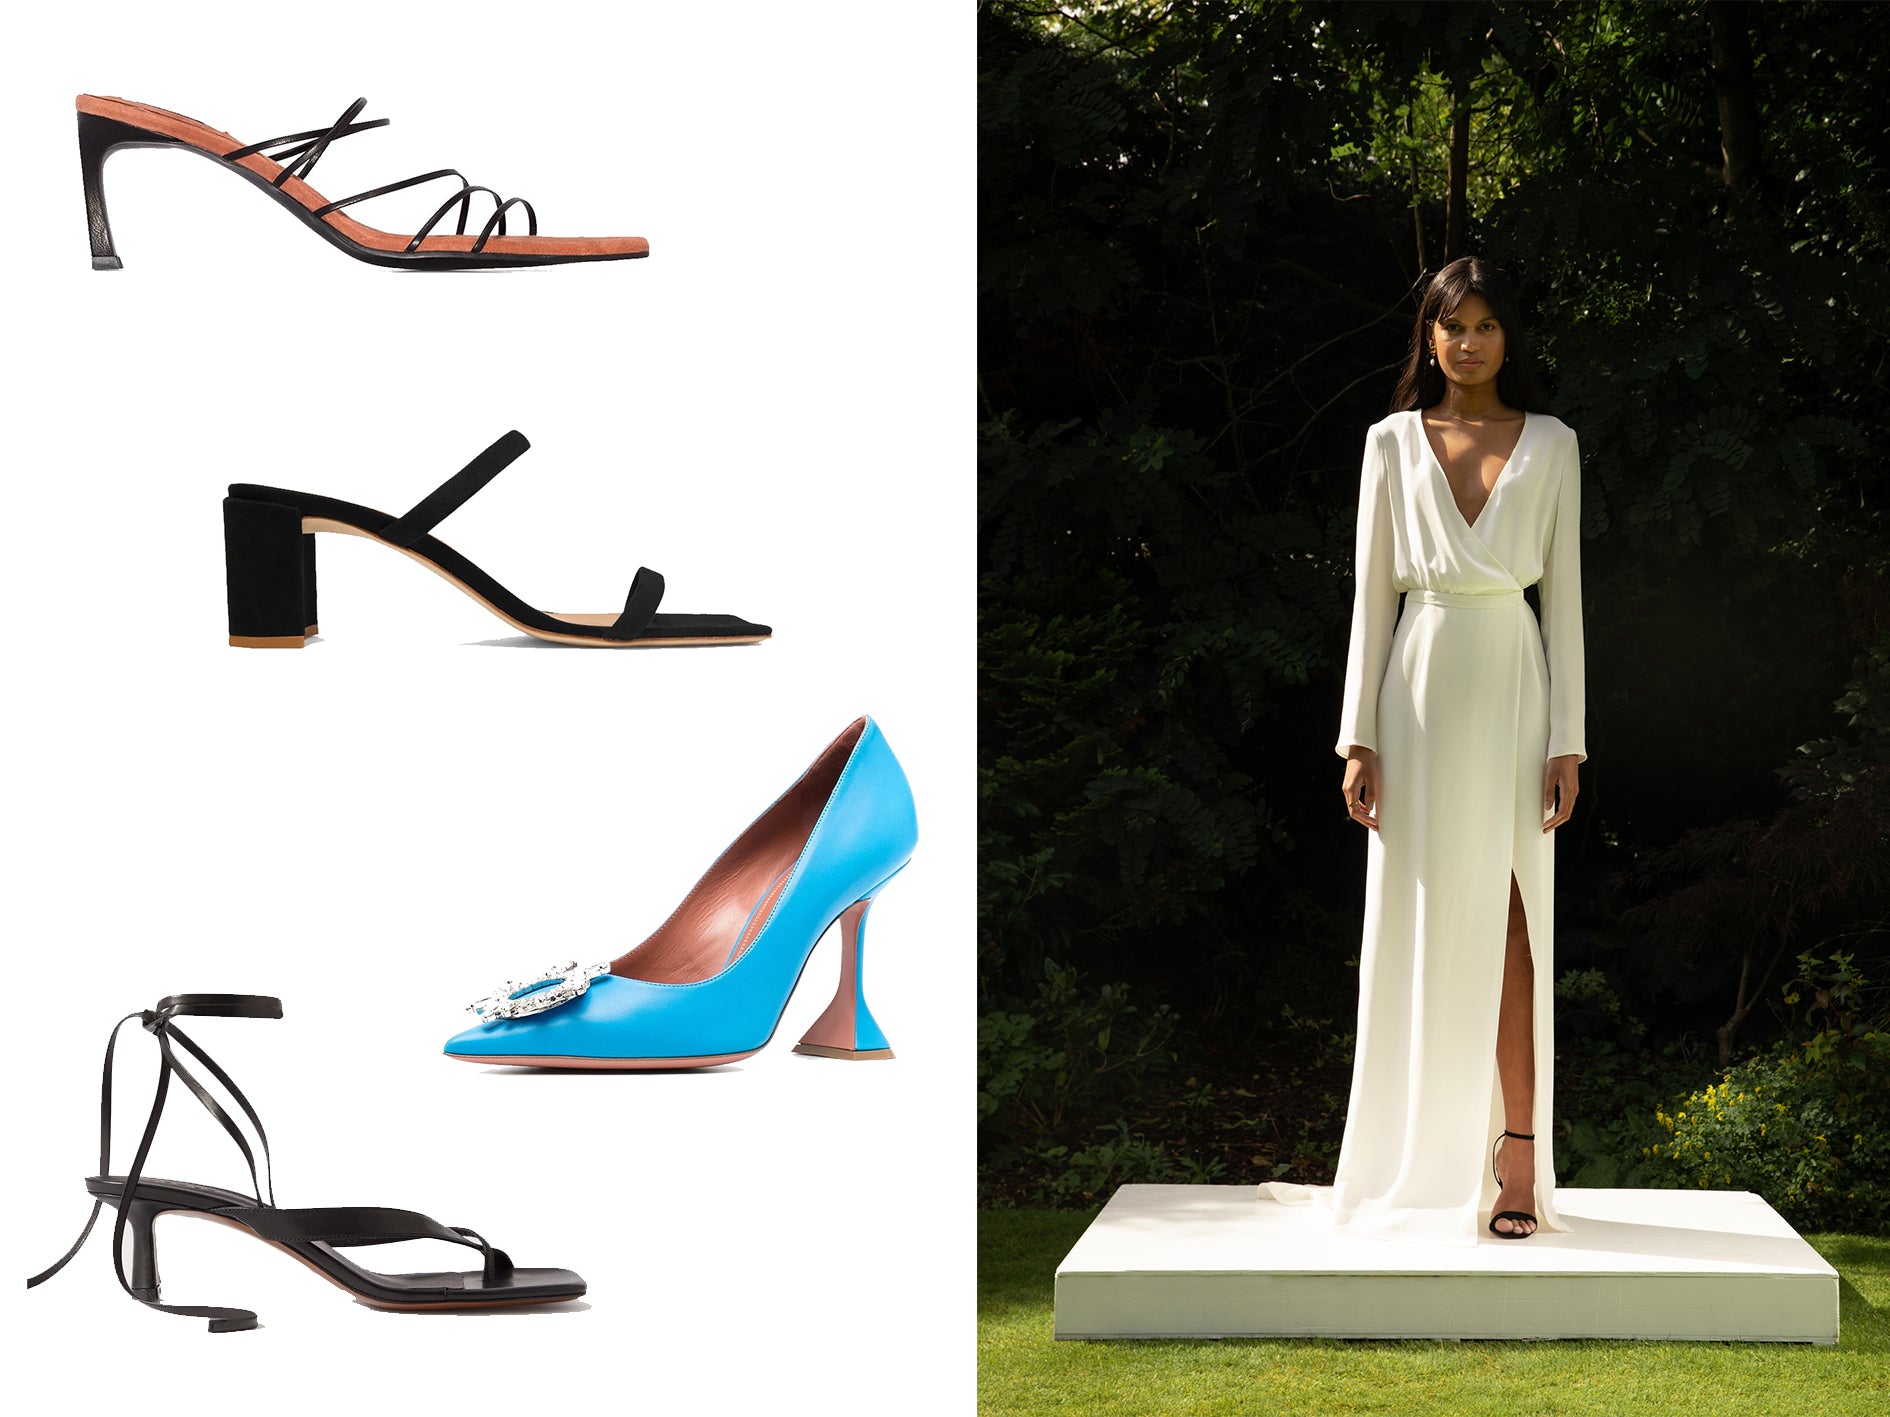 TEN COOL FLAT + LOW HEEL SHOES TO WEAR ON YOUR WEDDING DAY – THE OWN STUDIO